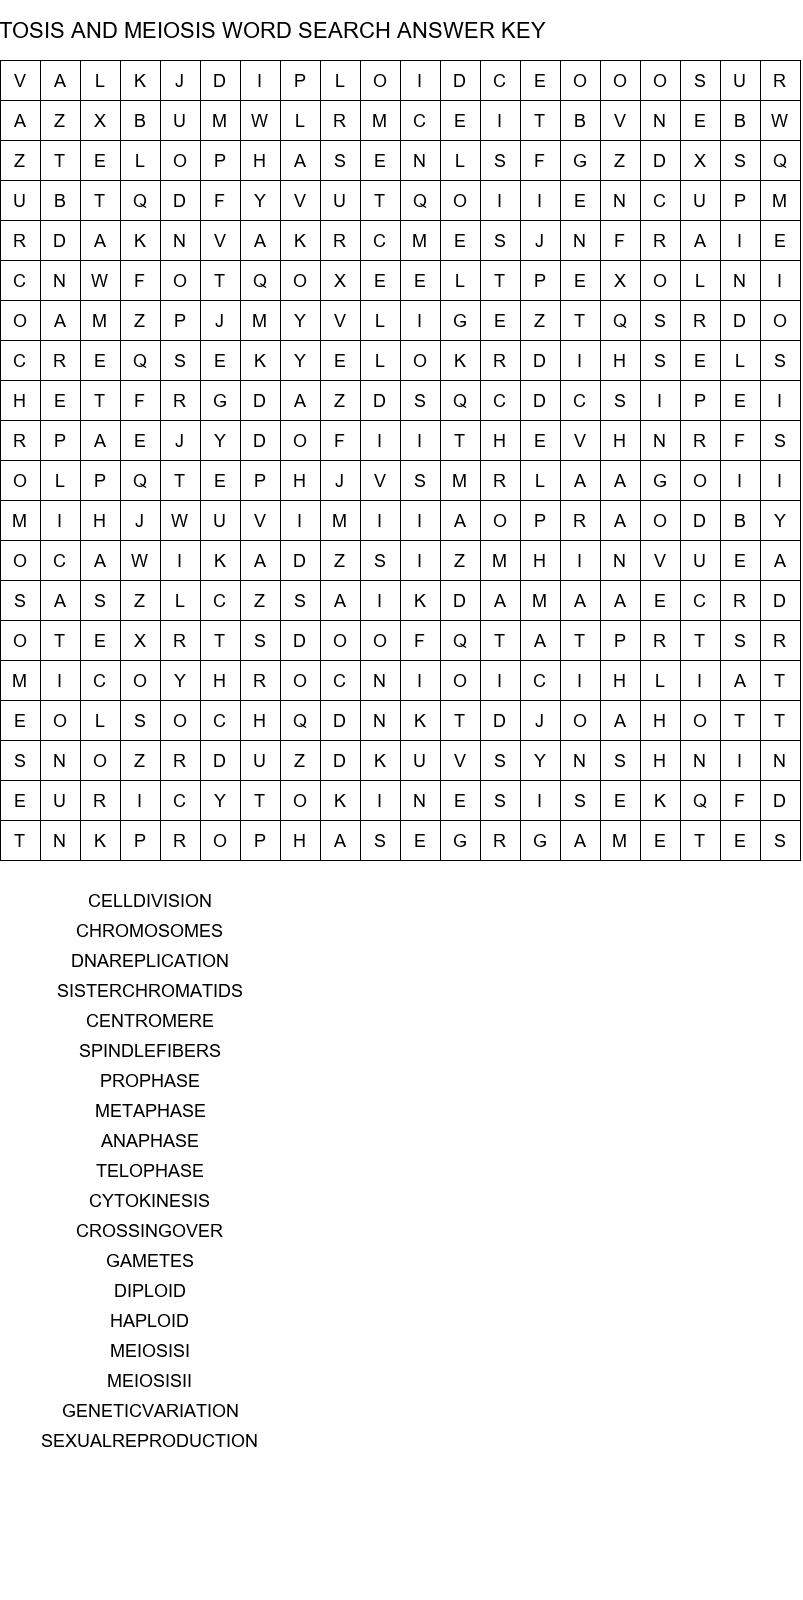 mitosis and meiosis word search answer key size 20x20